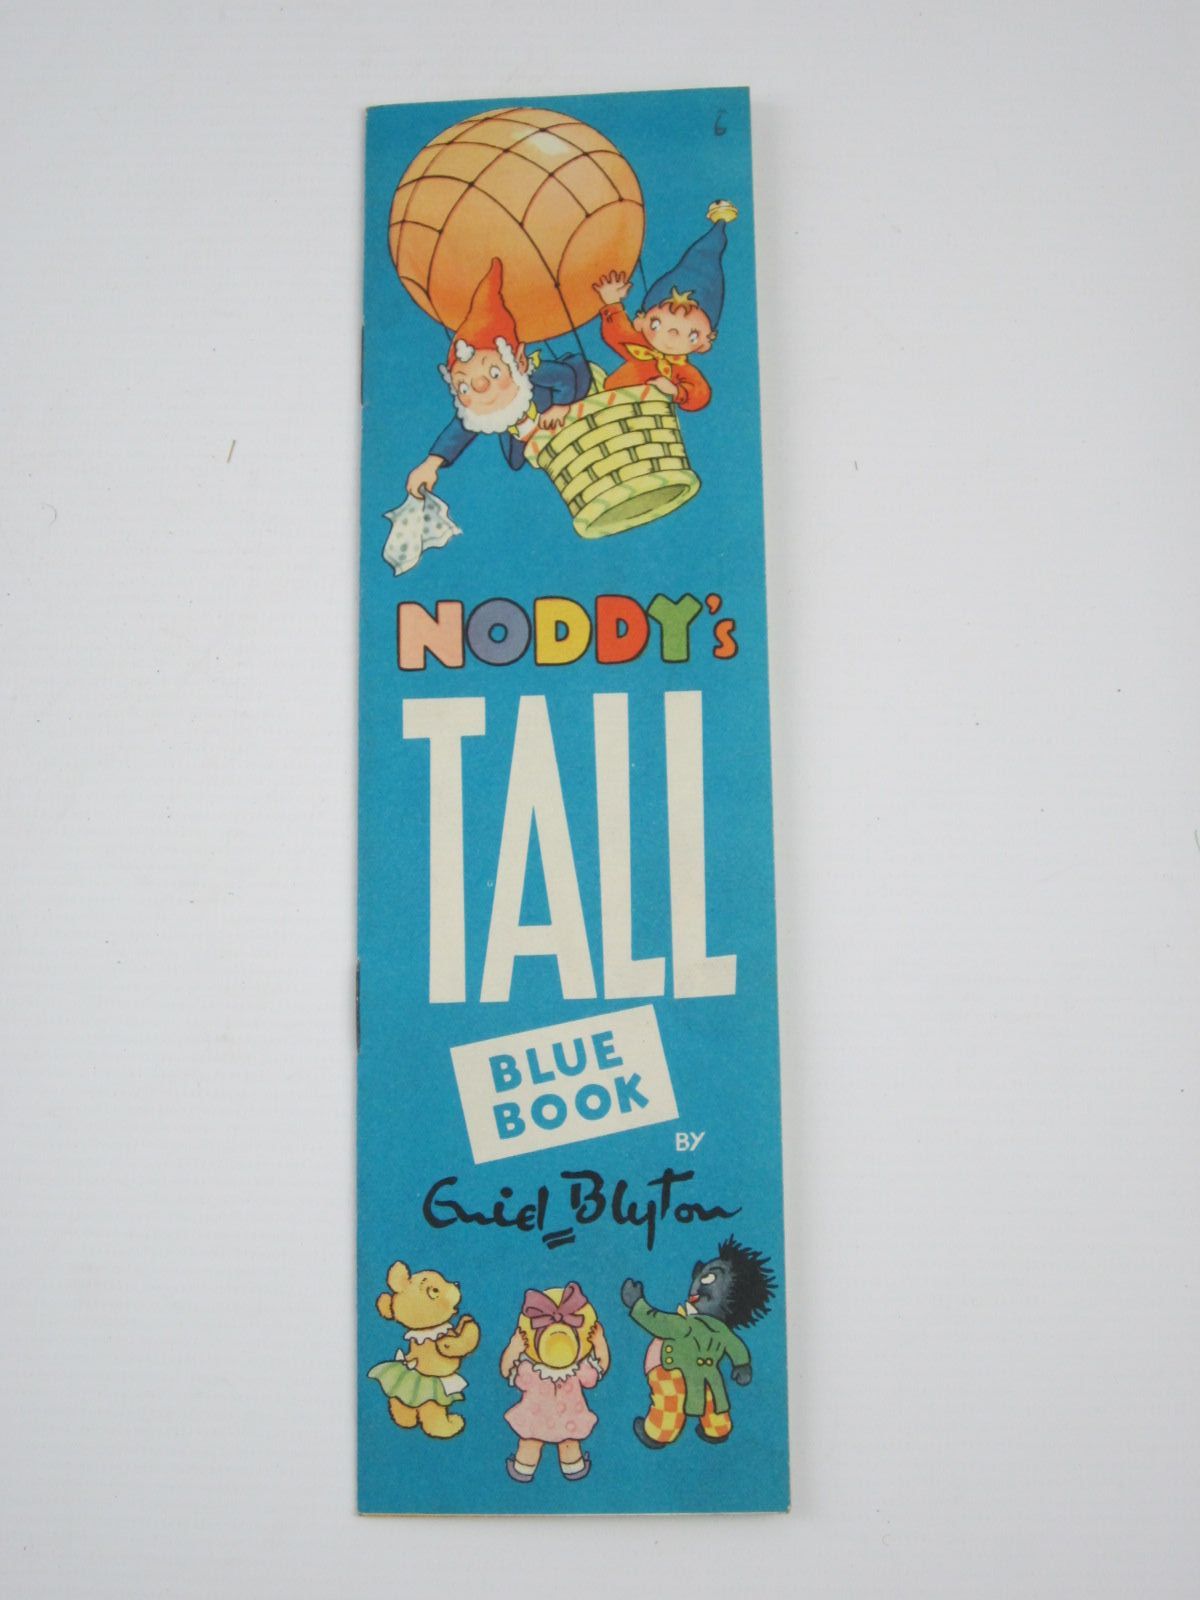 Cover of NODDY'S TALL BLUE BOOK by Enid Blyton